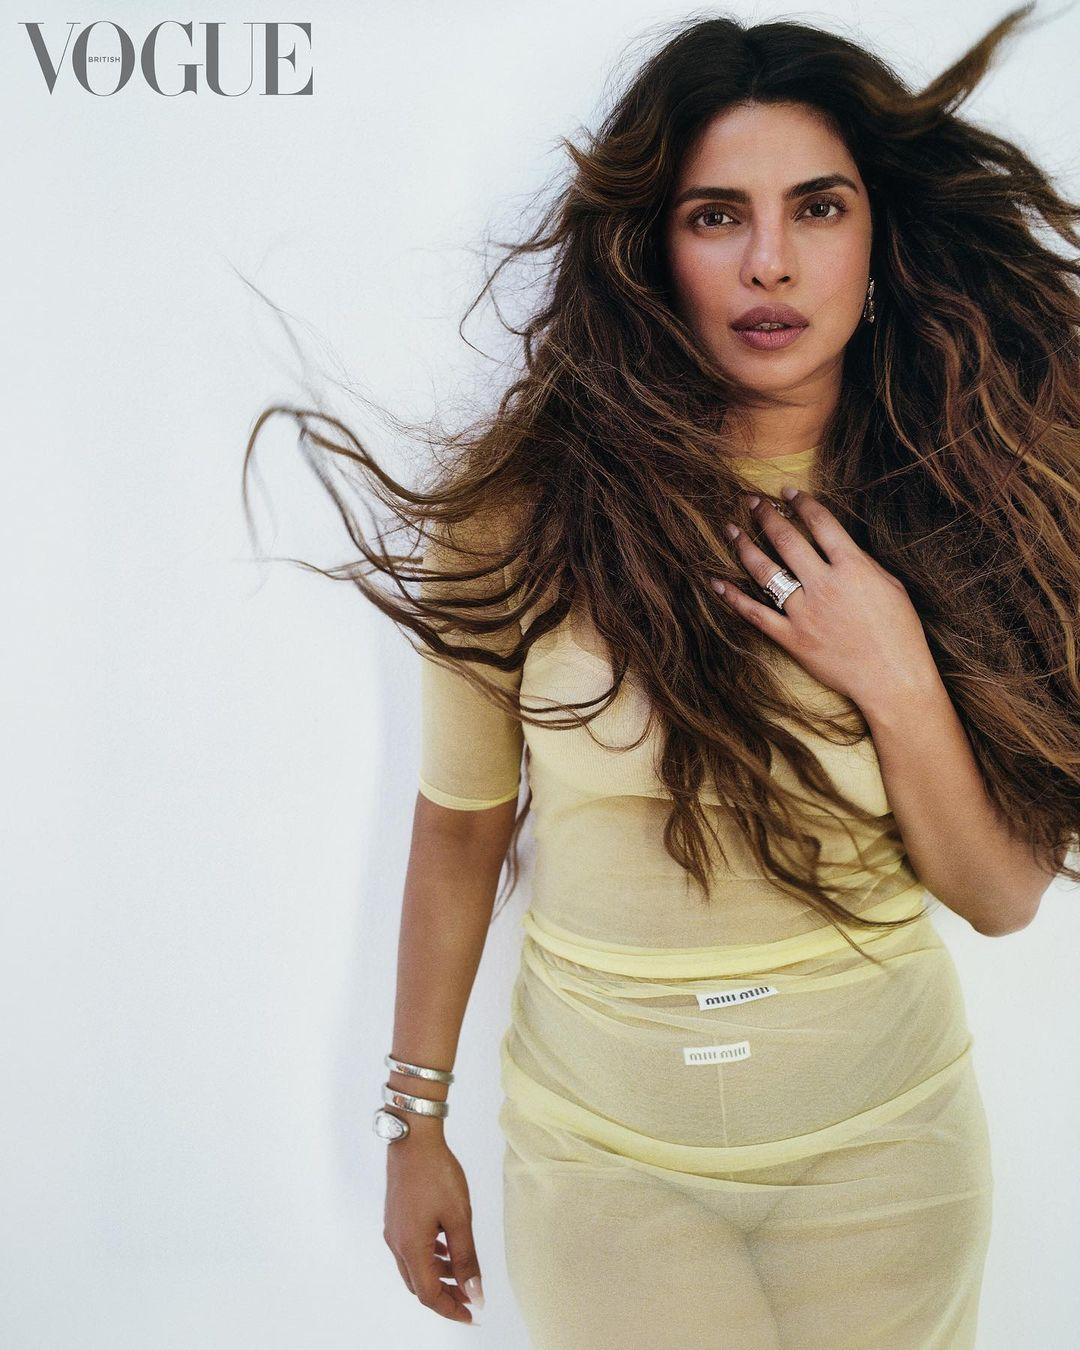 Priyanka Chopra Accused Of 'Trying To Smother' Her Daughter To Keep Her Face Out Of 'Vogue' Cover Shoot